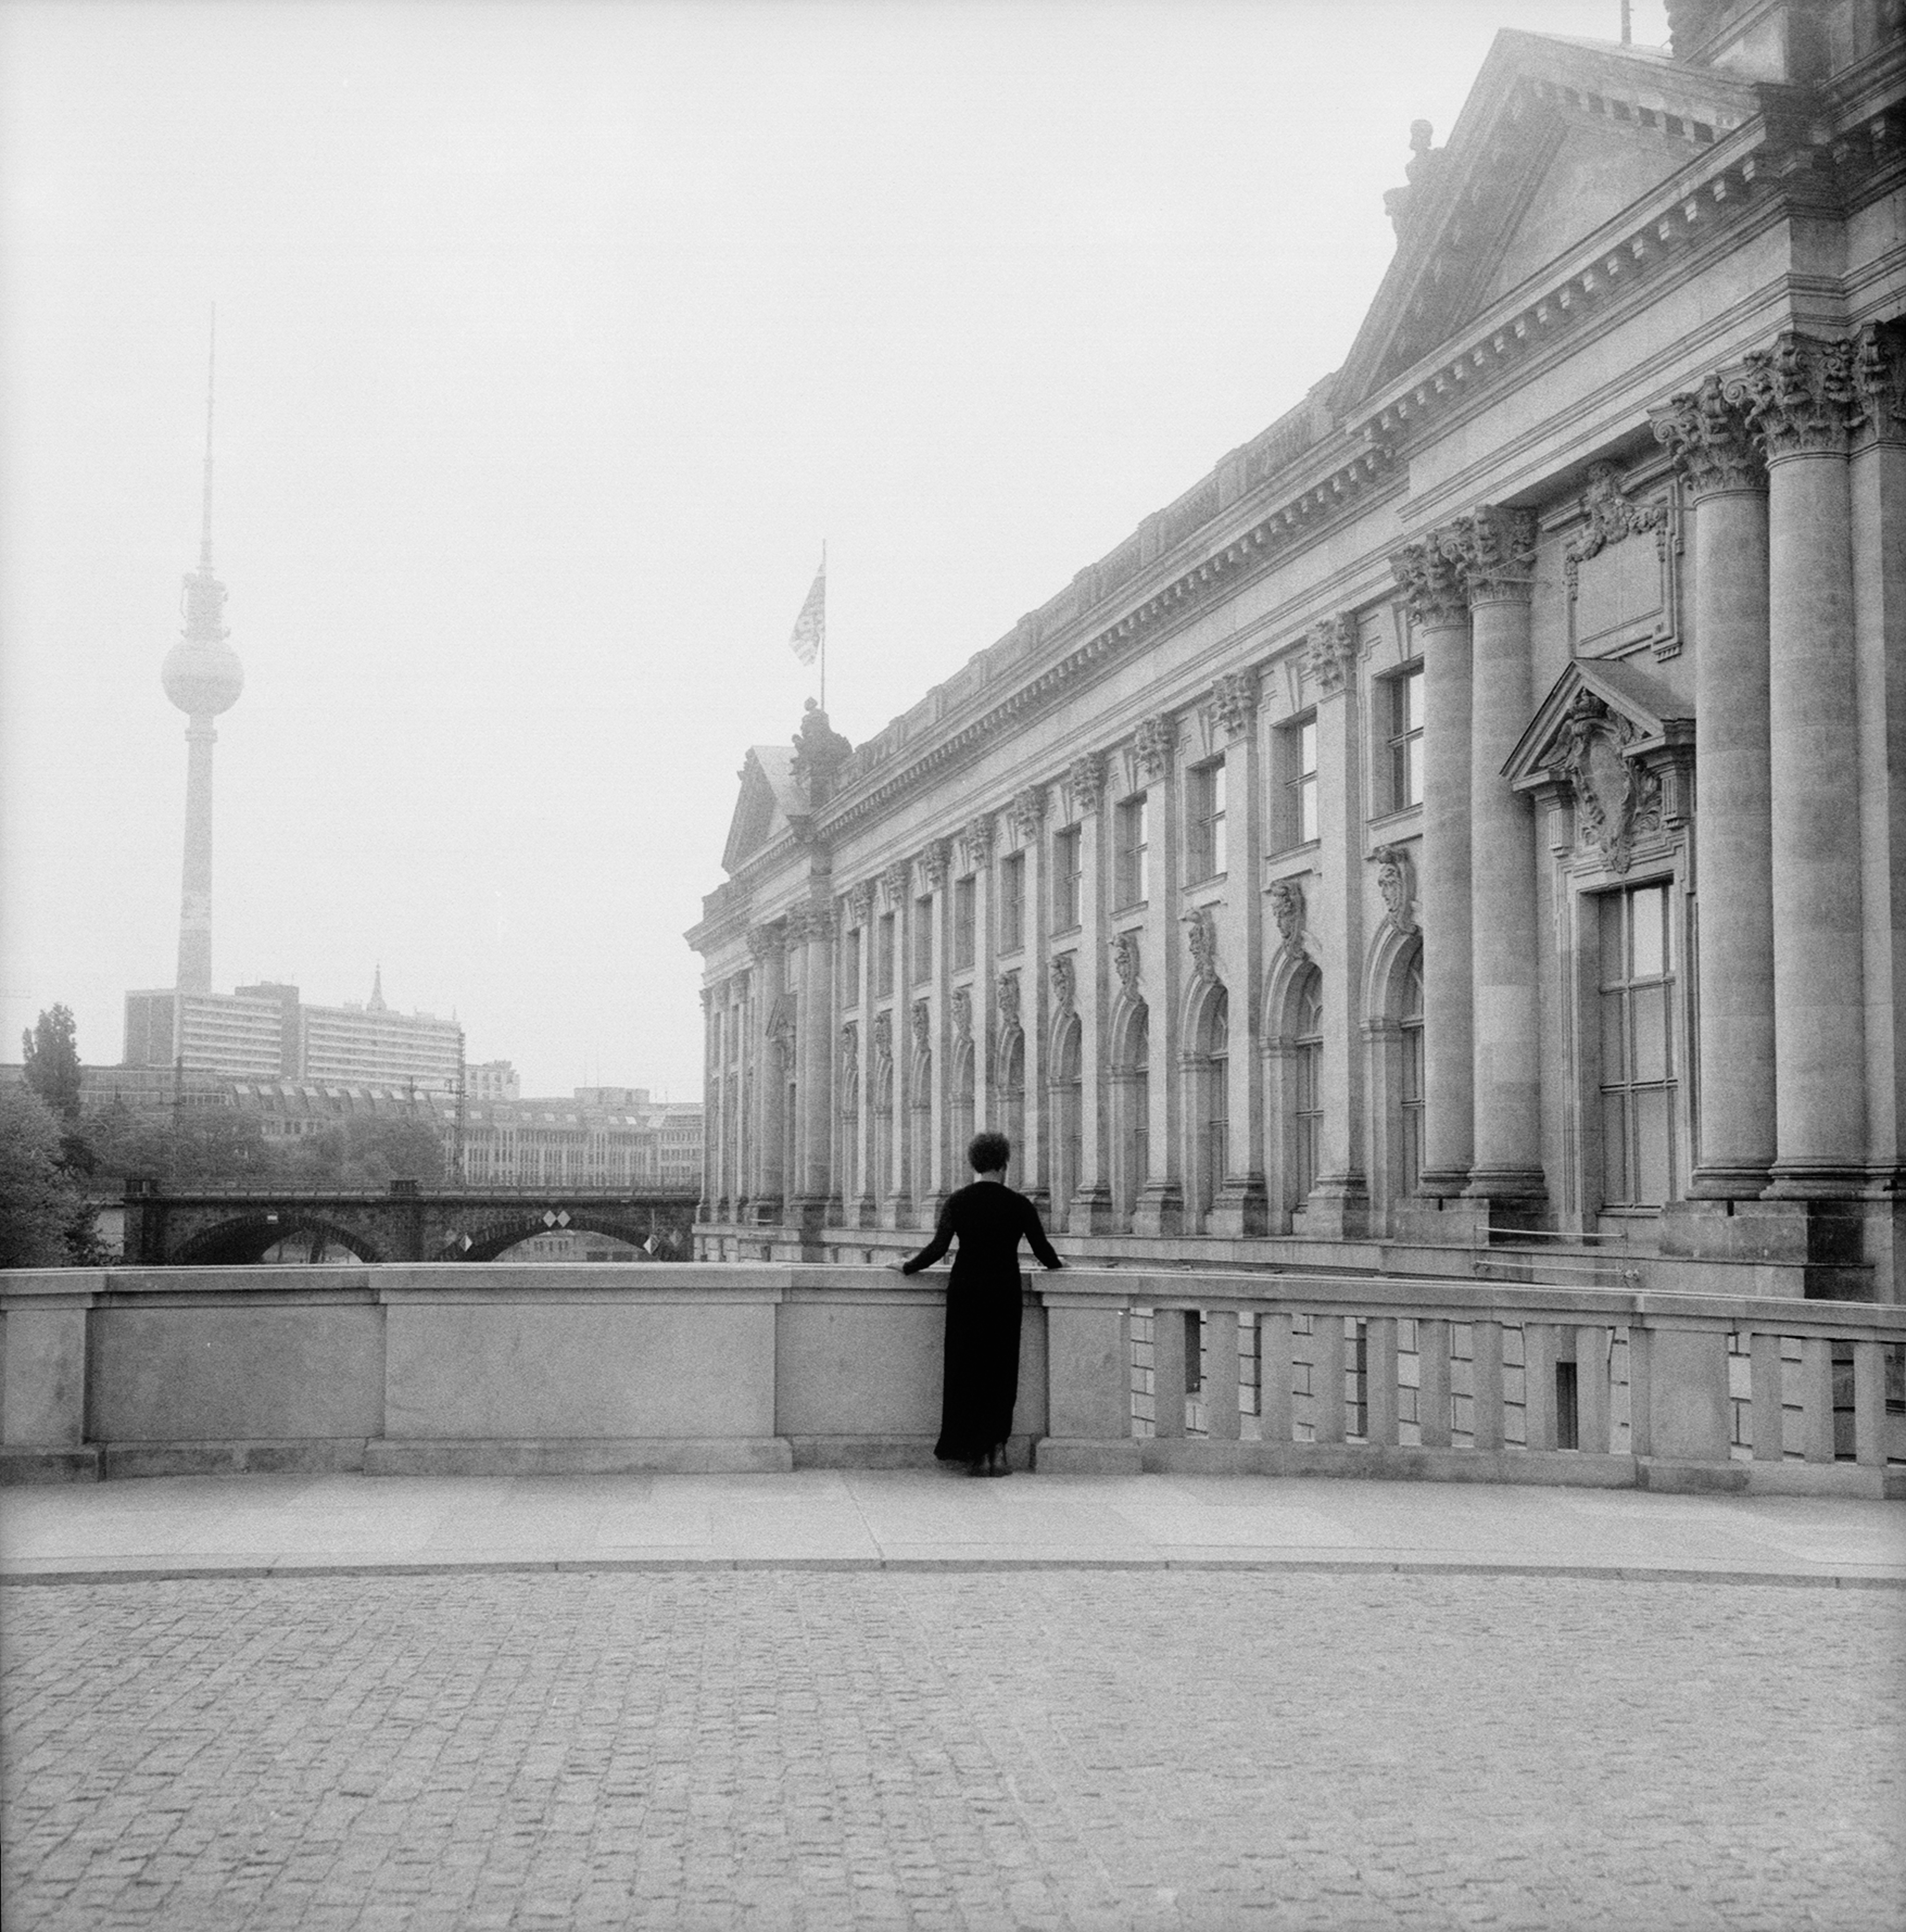 Galerie Barbara Thumm \ Carrie Mae Weems – People in Conditions \ Pergamon Museum (2006)